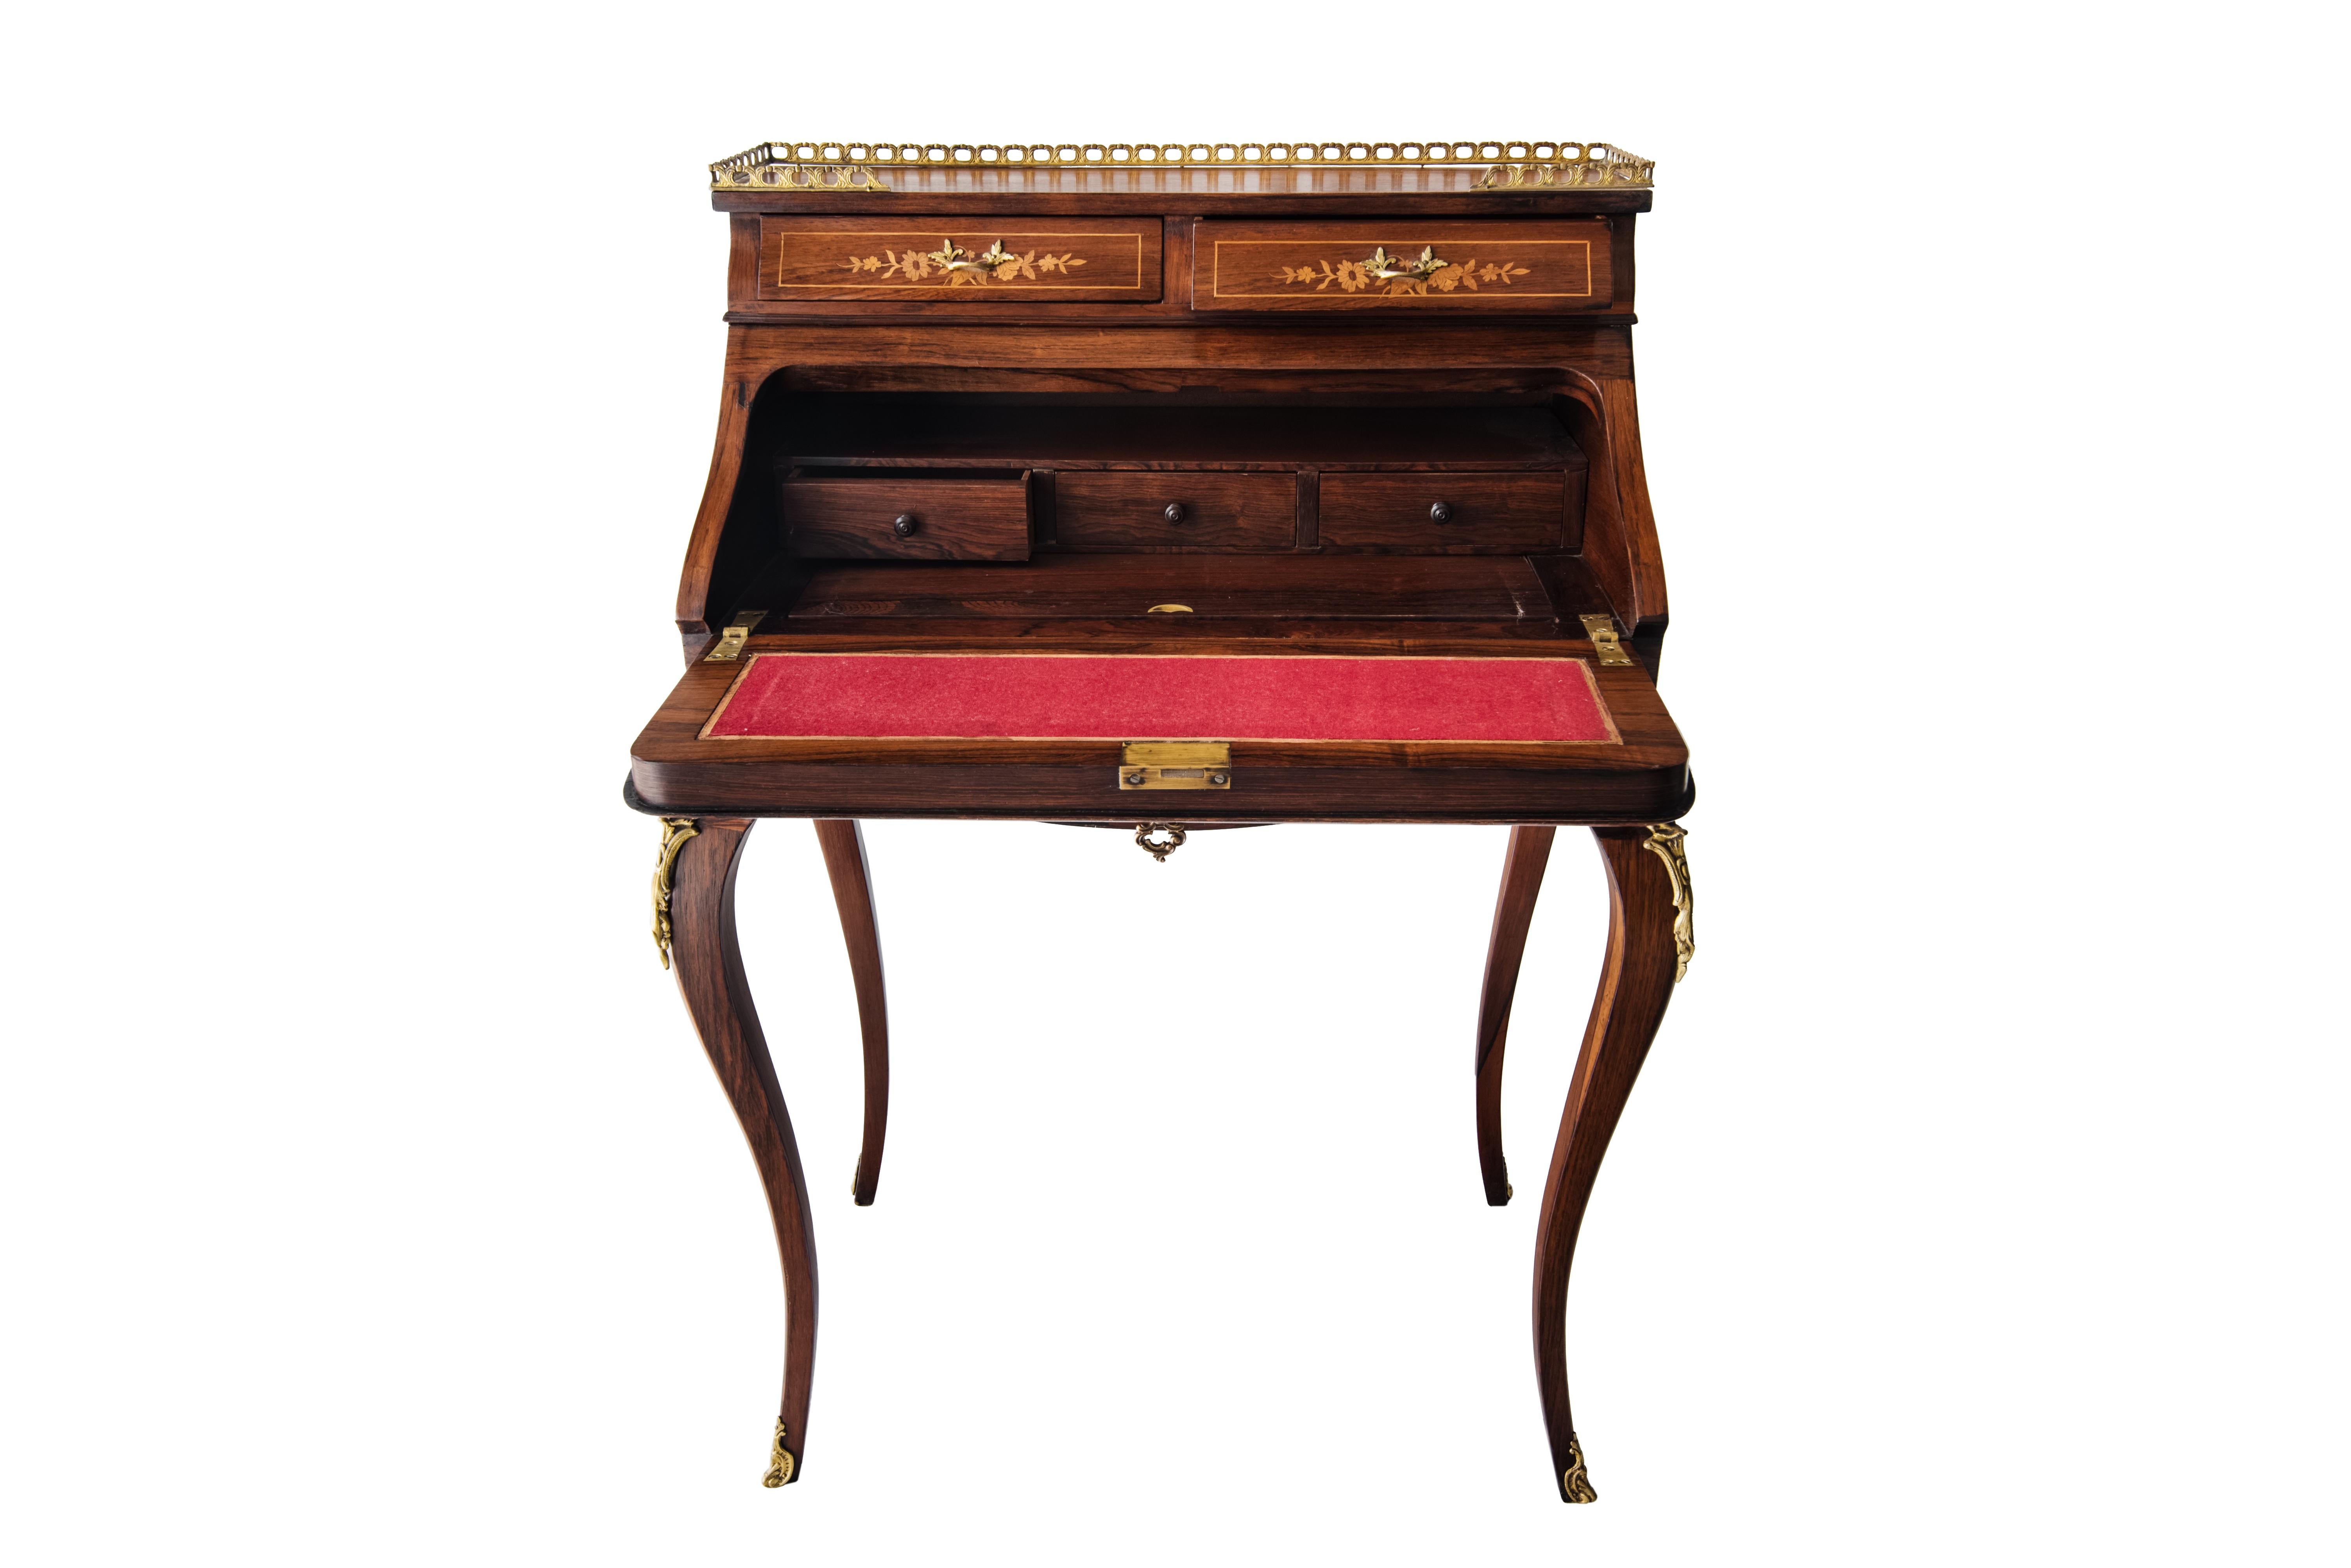 Late 19th Century 19th Century Rosewood French Louis XV Style Marquetry Bureau Desk with Secret For Sale